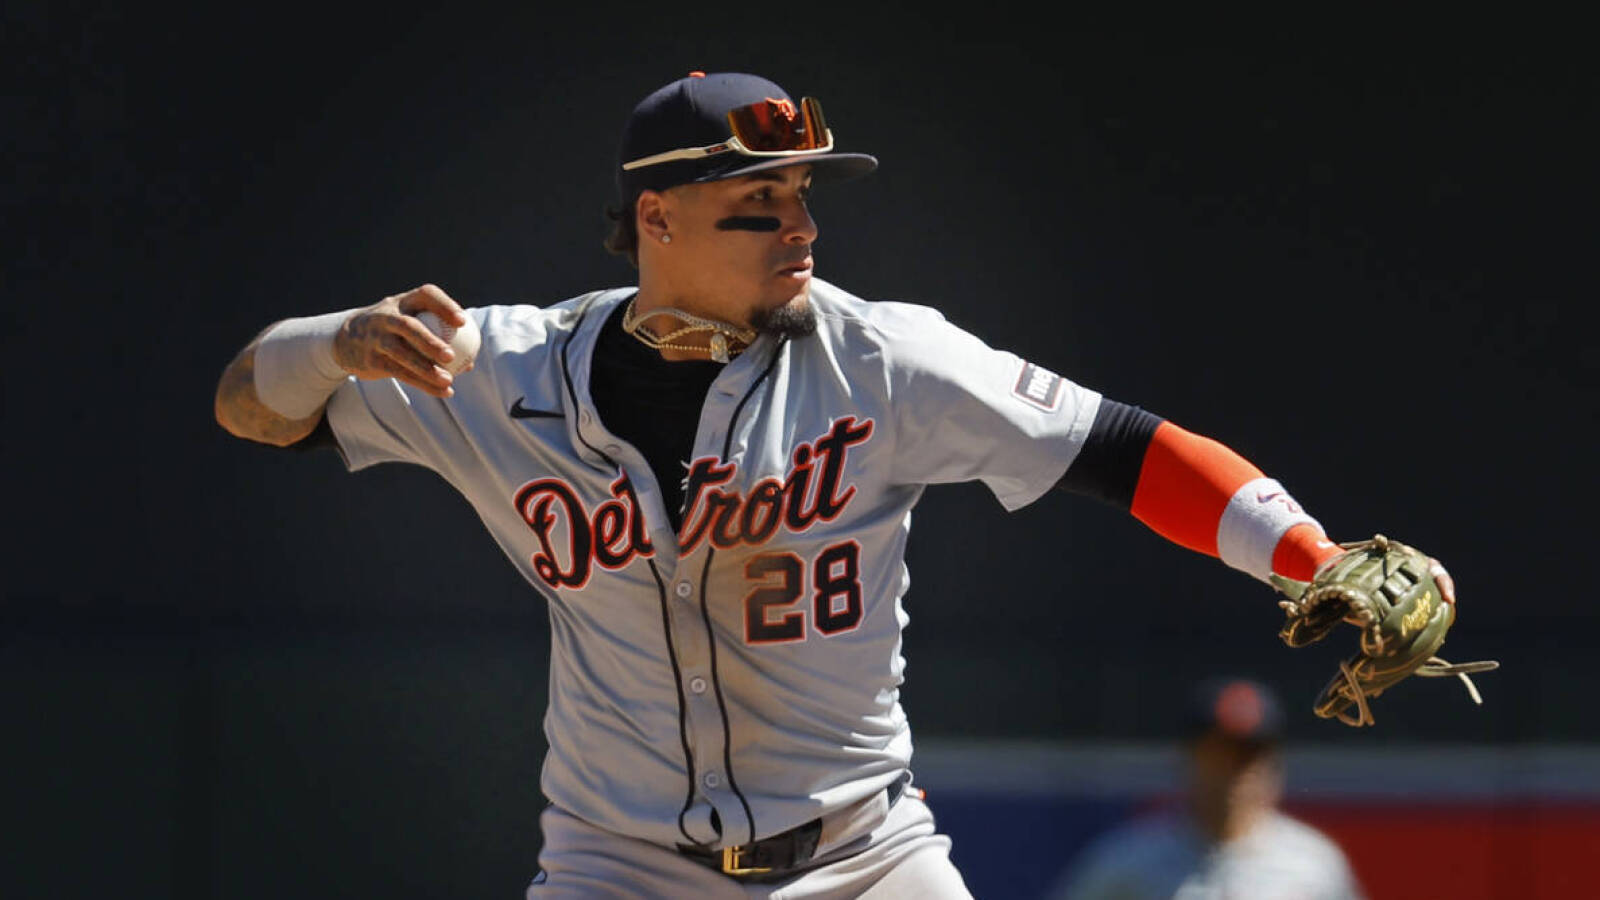 Javier Baez still being on the Tigers is an indictment against team owner